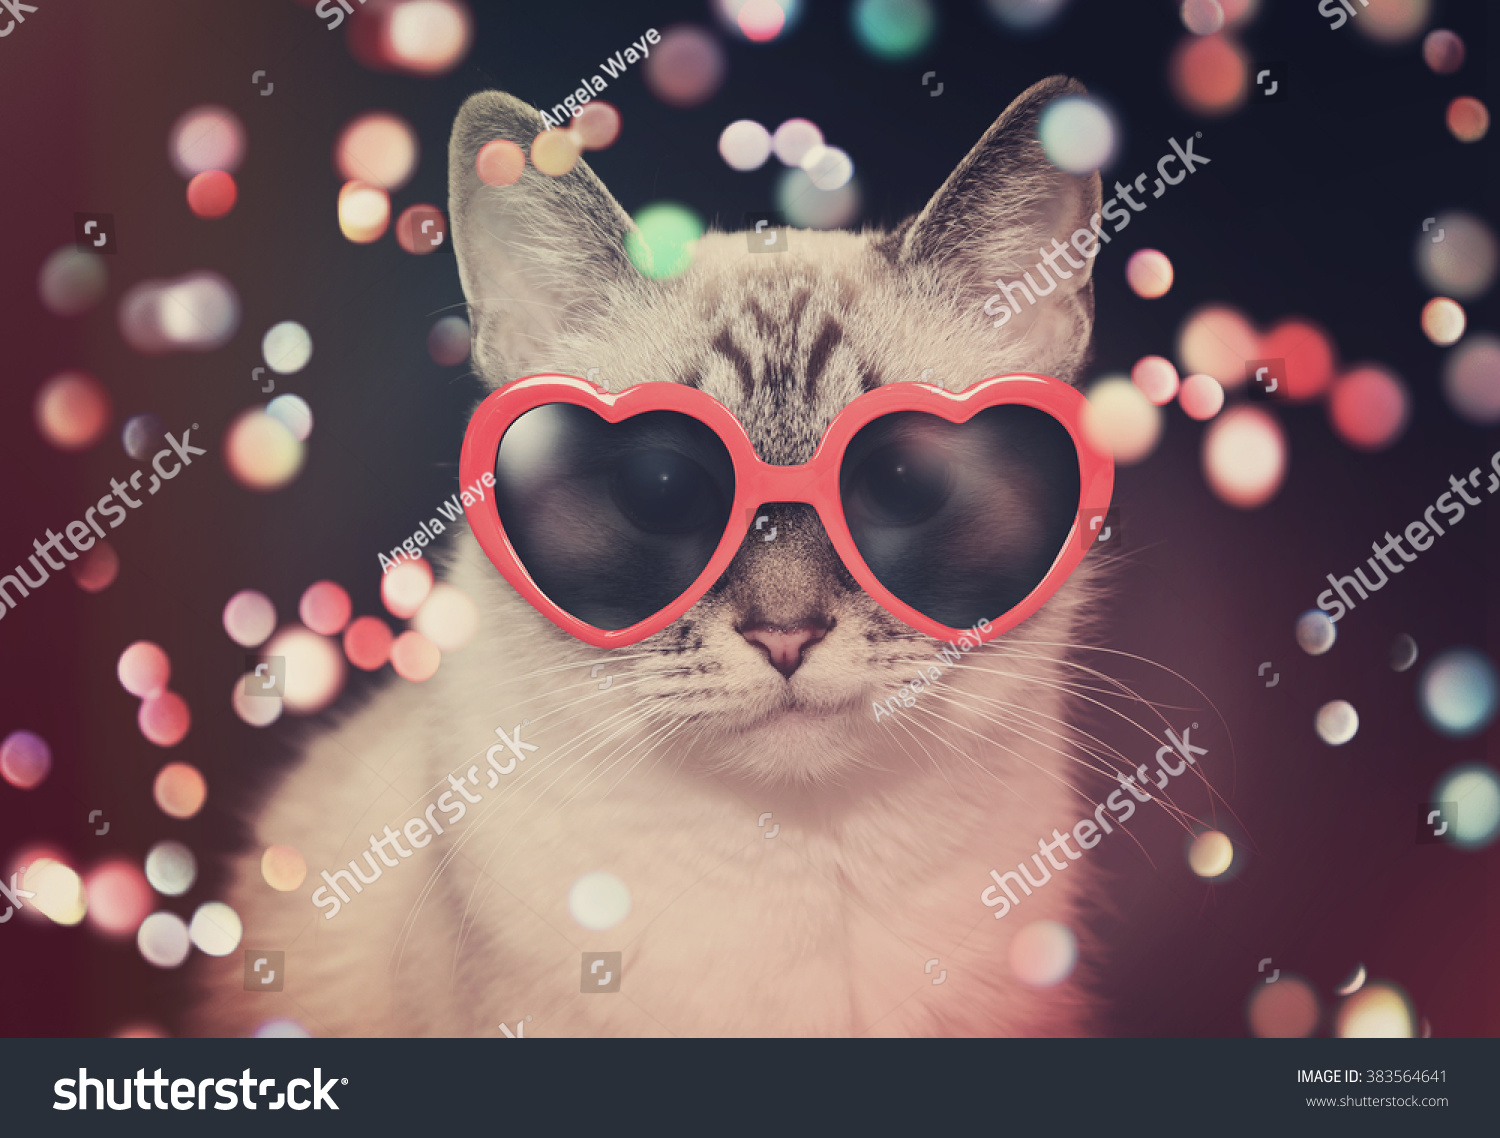 A white cute cat with red heart sunglasses is on a black background with colorful sparkles around the pet for a party or celebration concept. #383564641